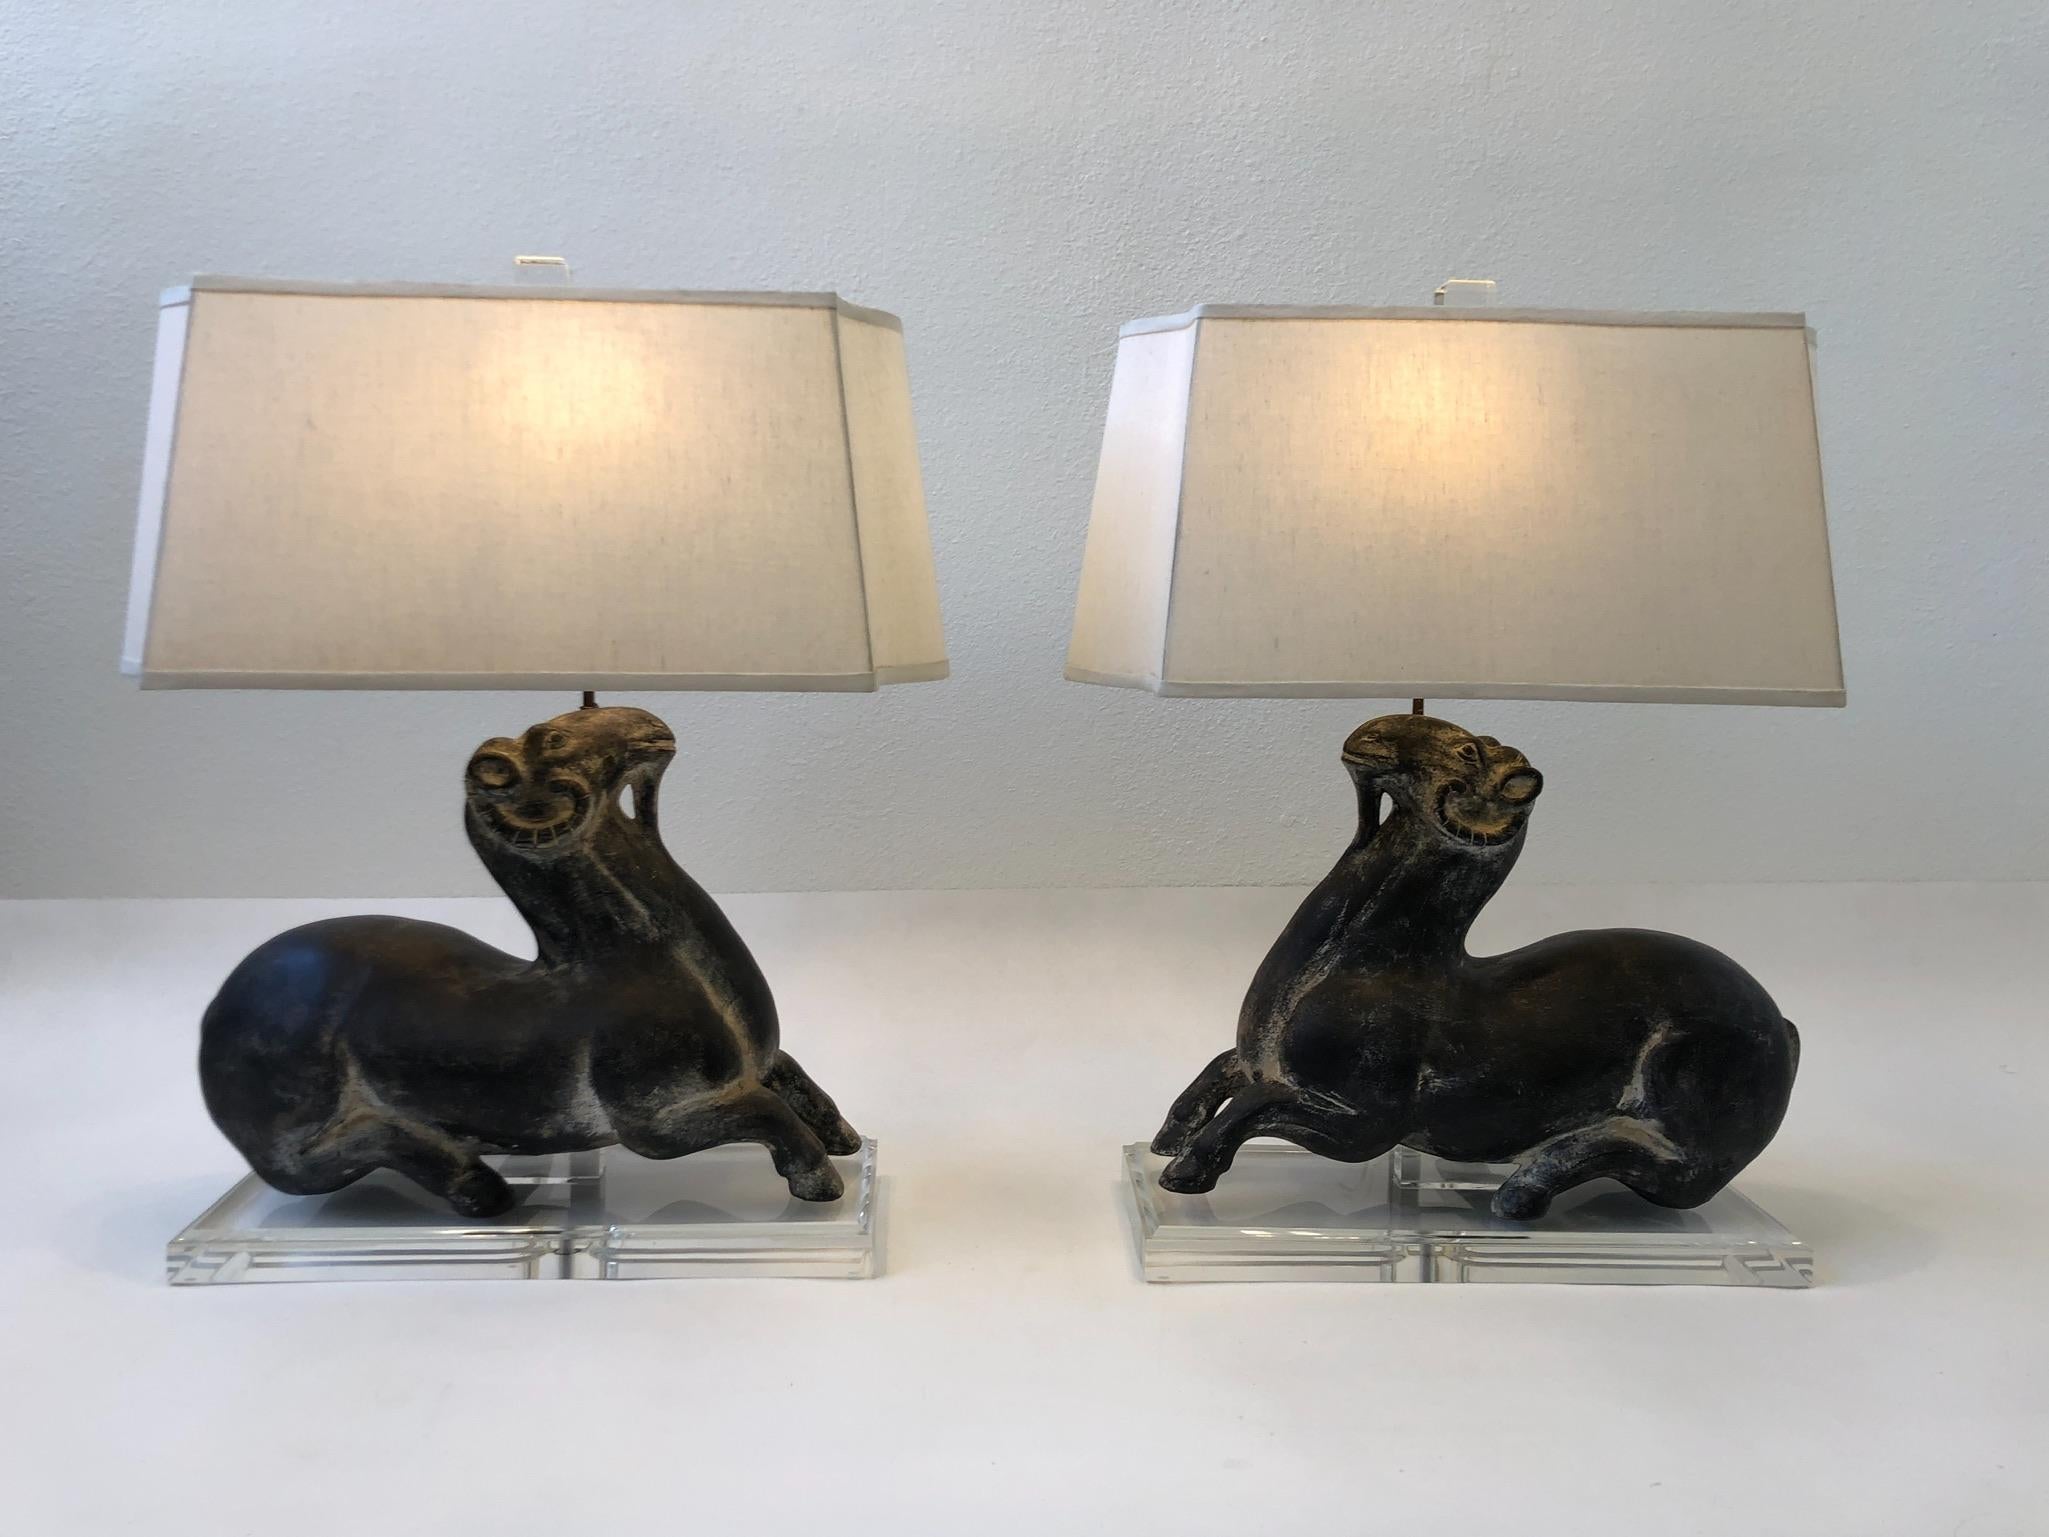 Pair of Ceramic Goats and Lucite Table Lamps by Steve Chase In Good Condition For Sale In Palm Springs, CA